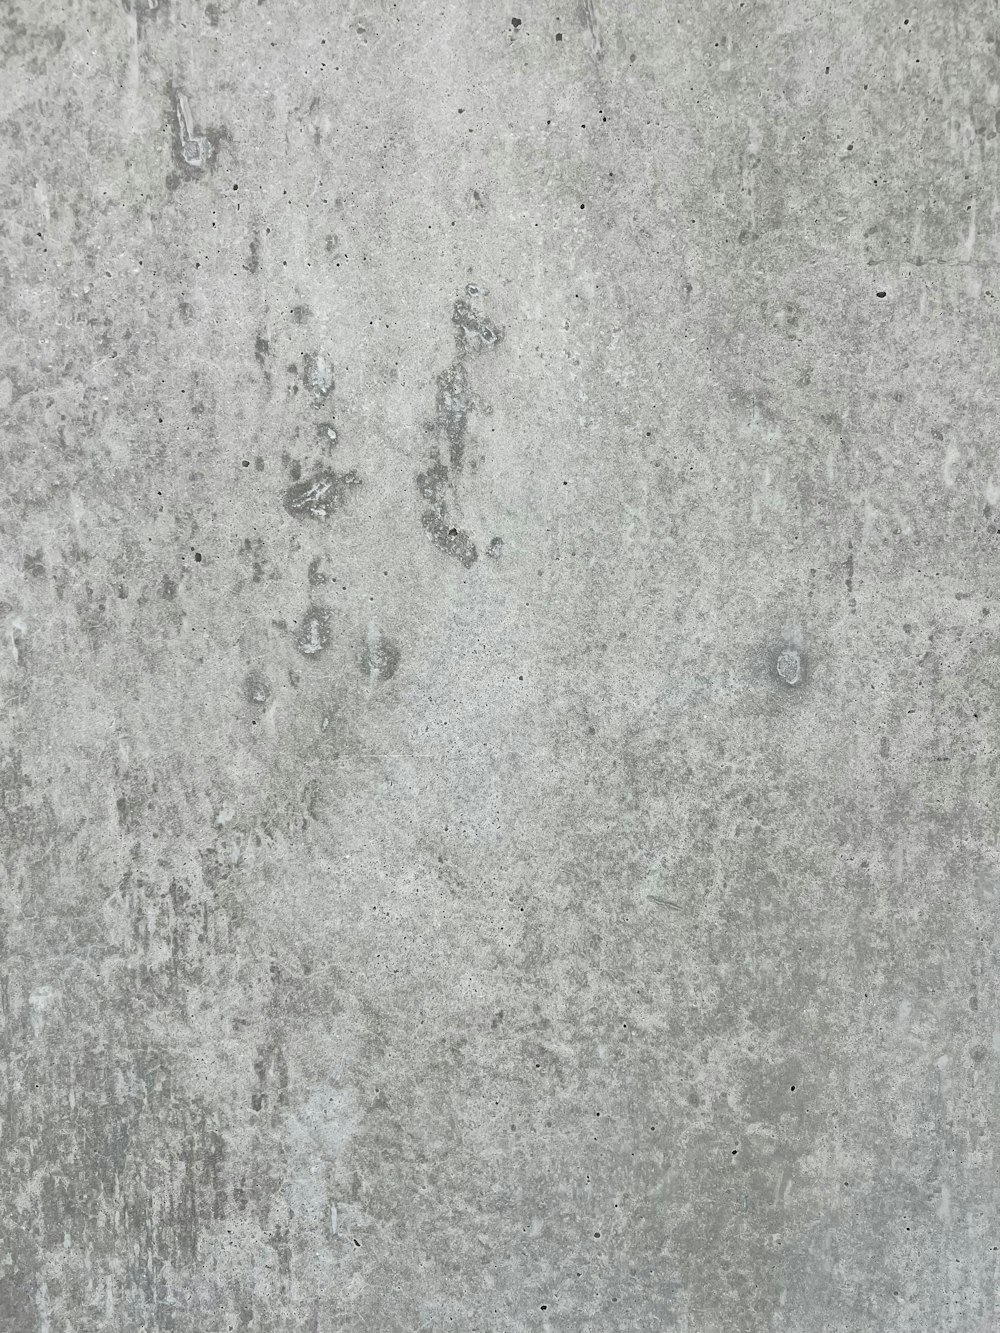 a gray concrete wall with small holes in it